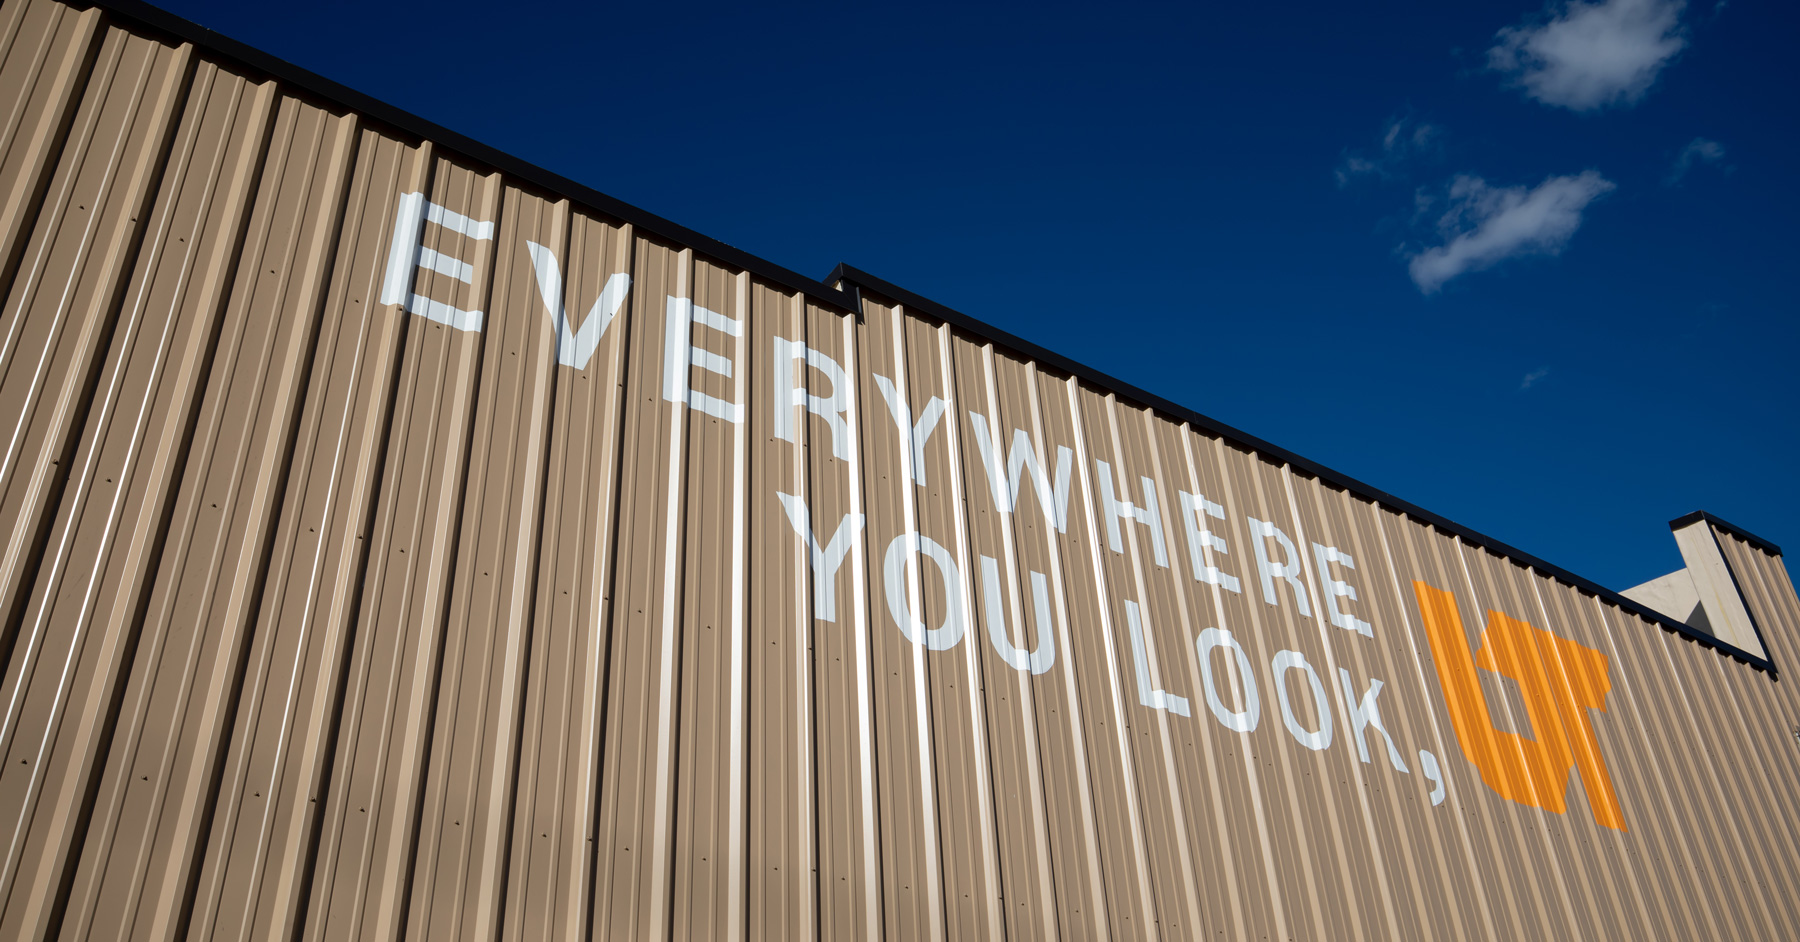 Everwhere You Look UT painted on an exterior aluminum wall